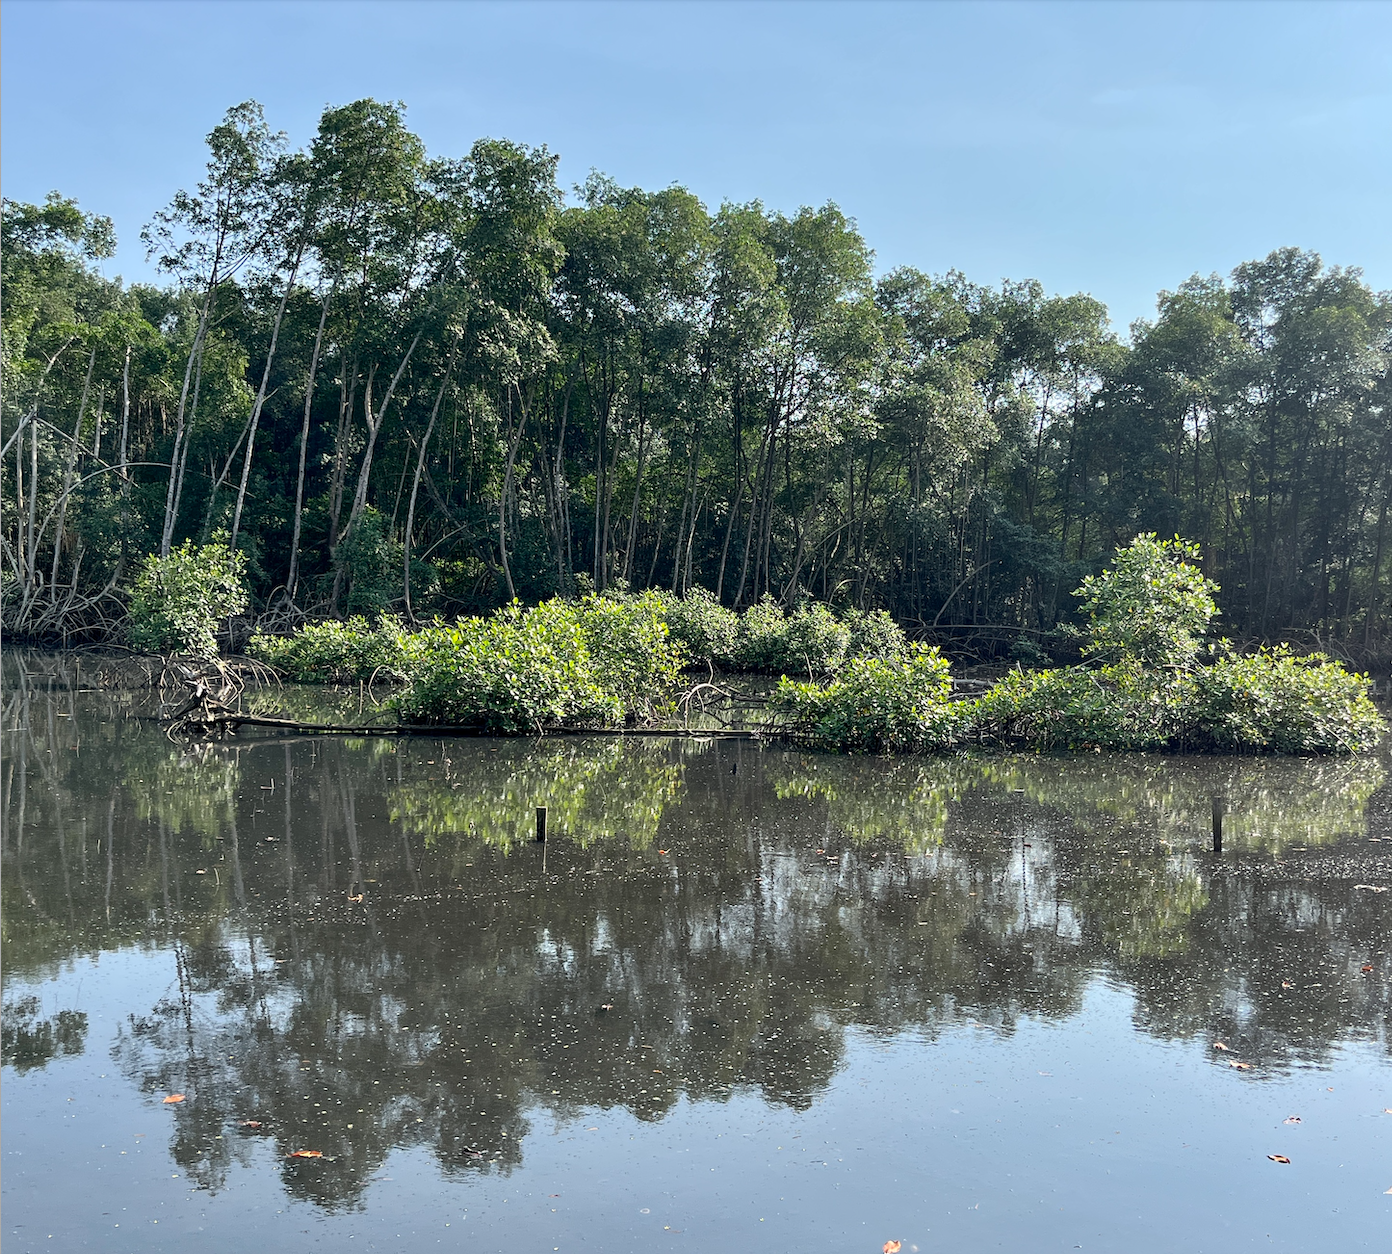 Lowé mangrove in Libreville, where deforestation is most intense in the city. Image by Elodie Toto / Mongabay / March 3 2023